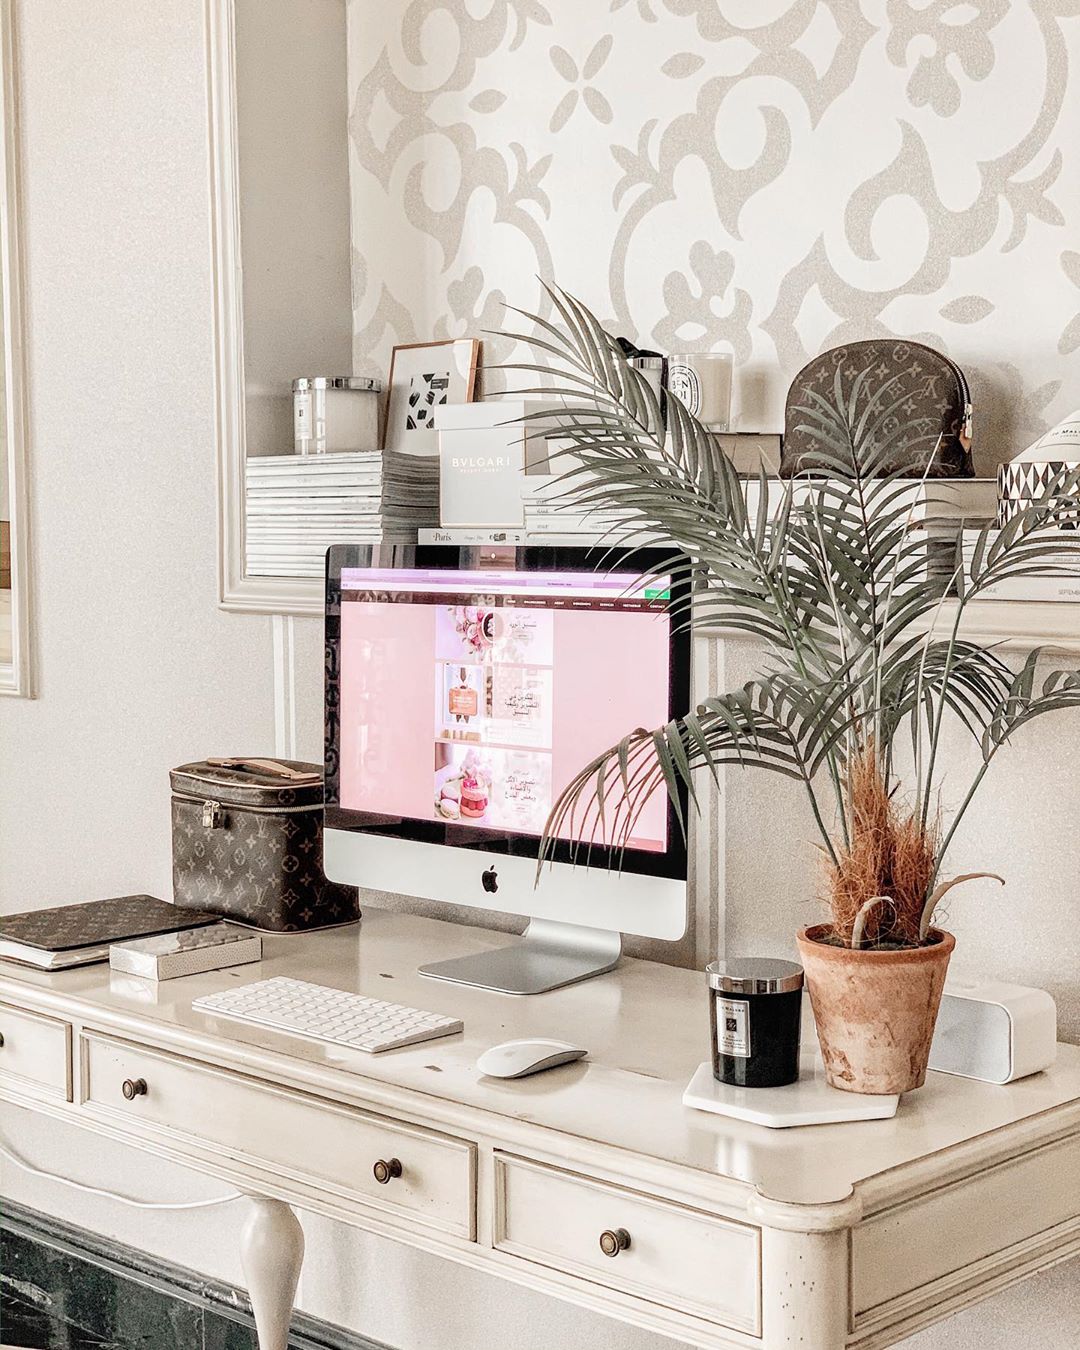 21 Home Office Storage Ideas for a More Productive Work Space